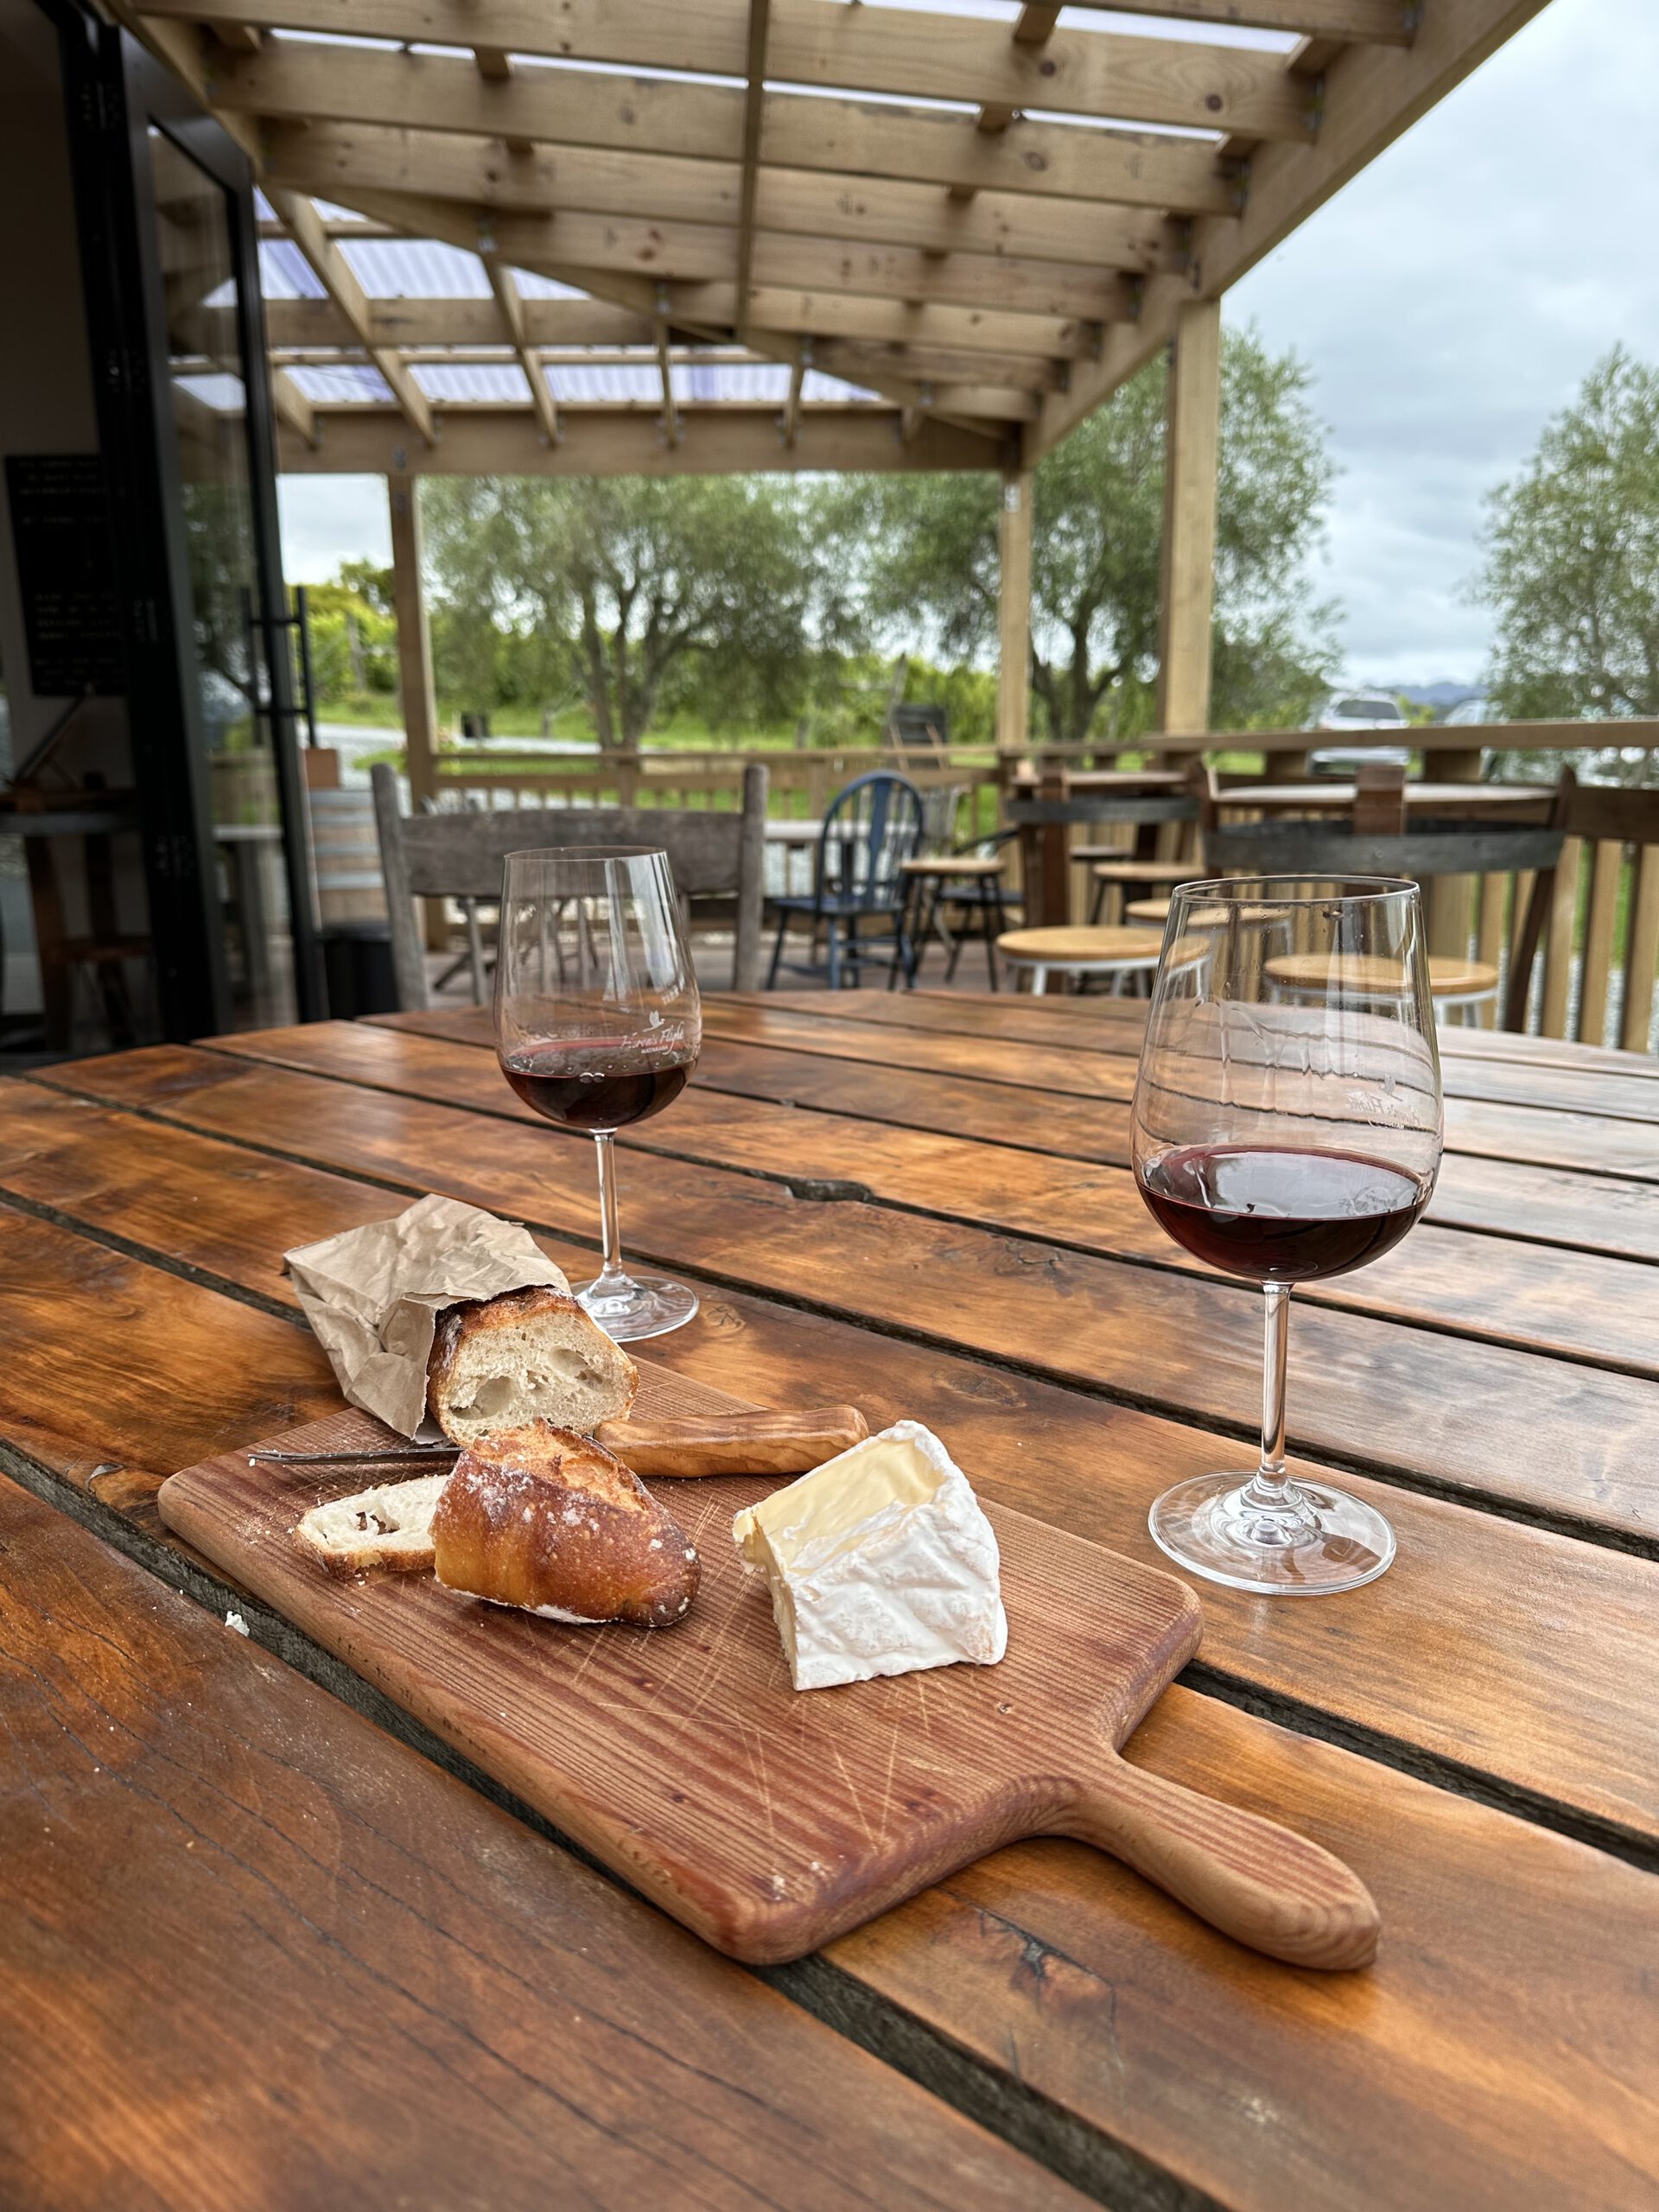 Drinking wine and eating charcuteries on a vineyard in New Zealand